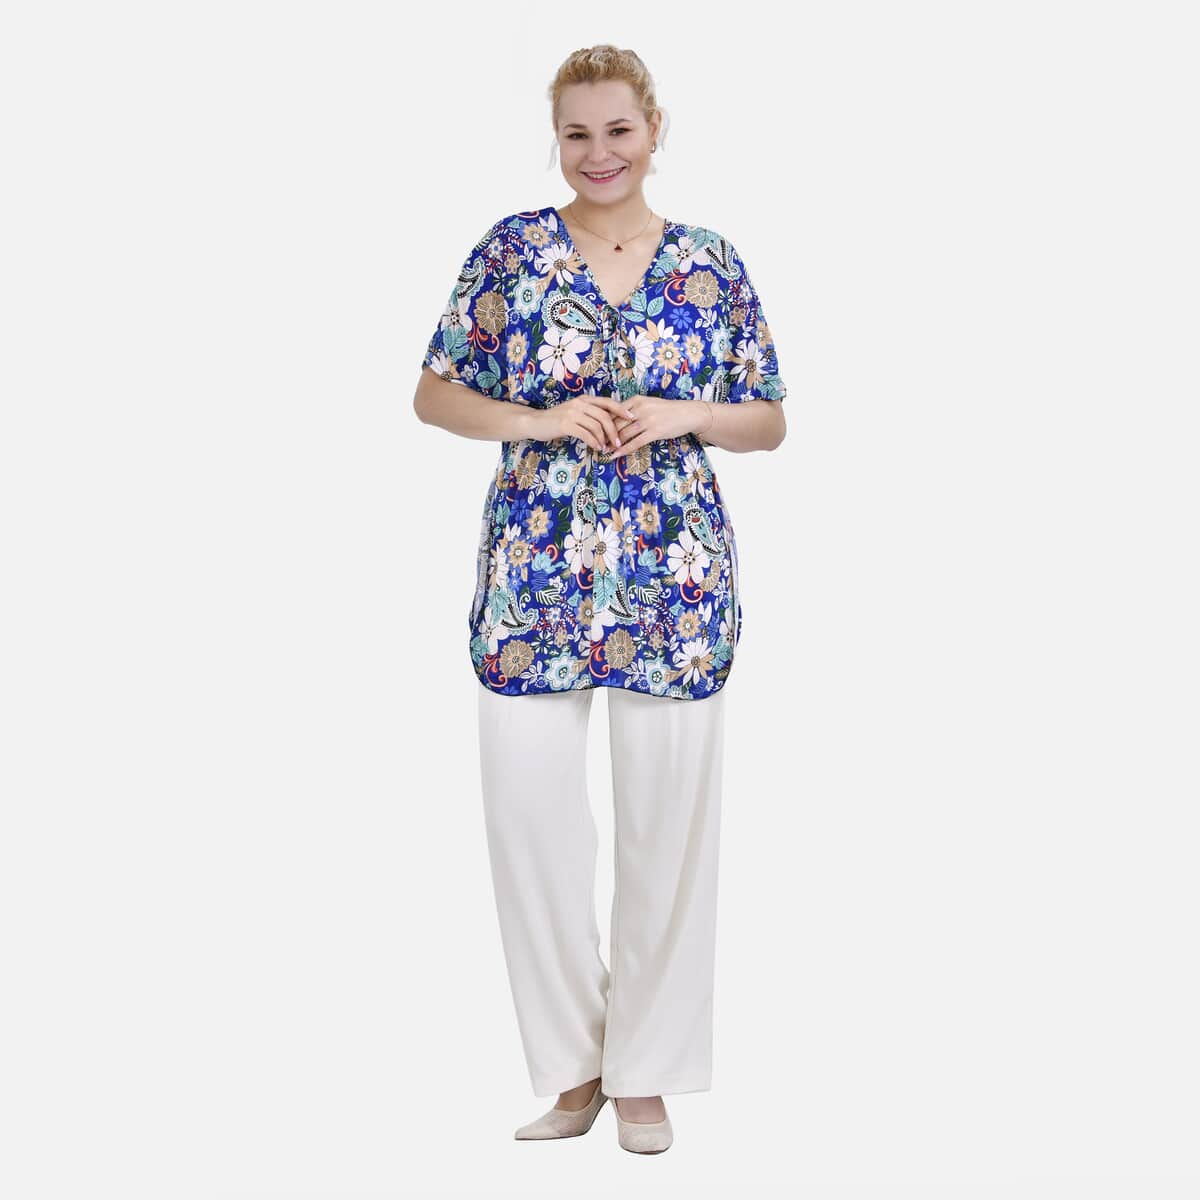 Tamsy Blue Paisley Floral Vneck Top with Kimono Style Arm - One Size Fits Most image number 0